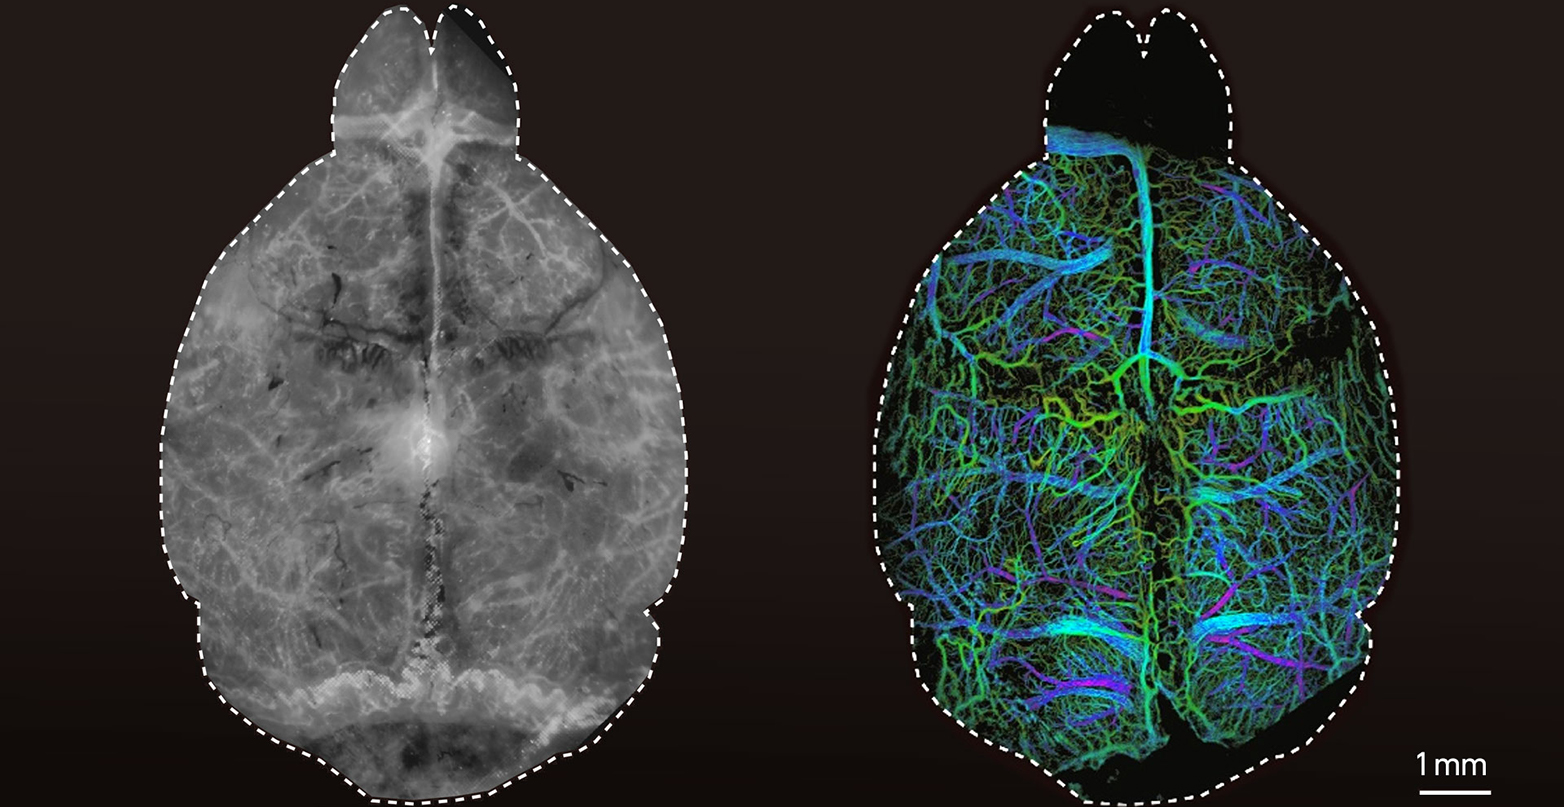 Two mouse brains, a conventional image on the left and a fluorescence image on the right.